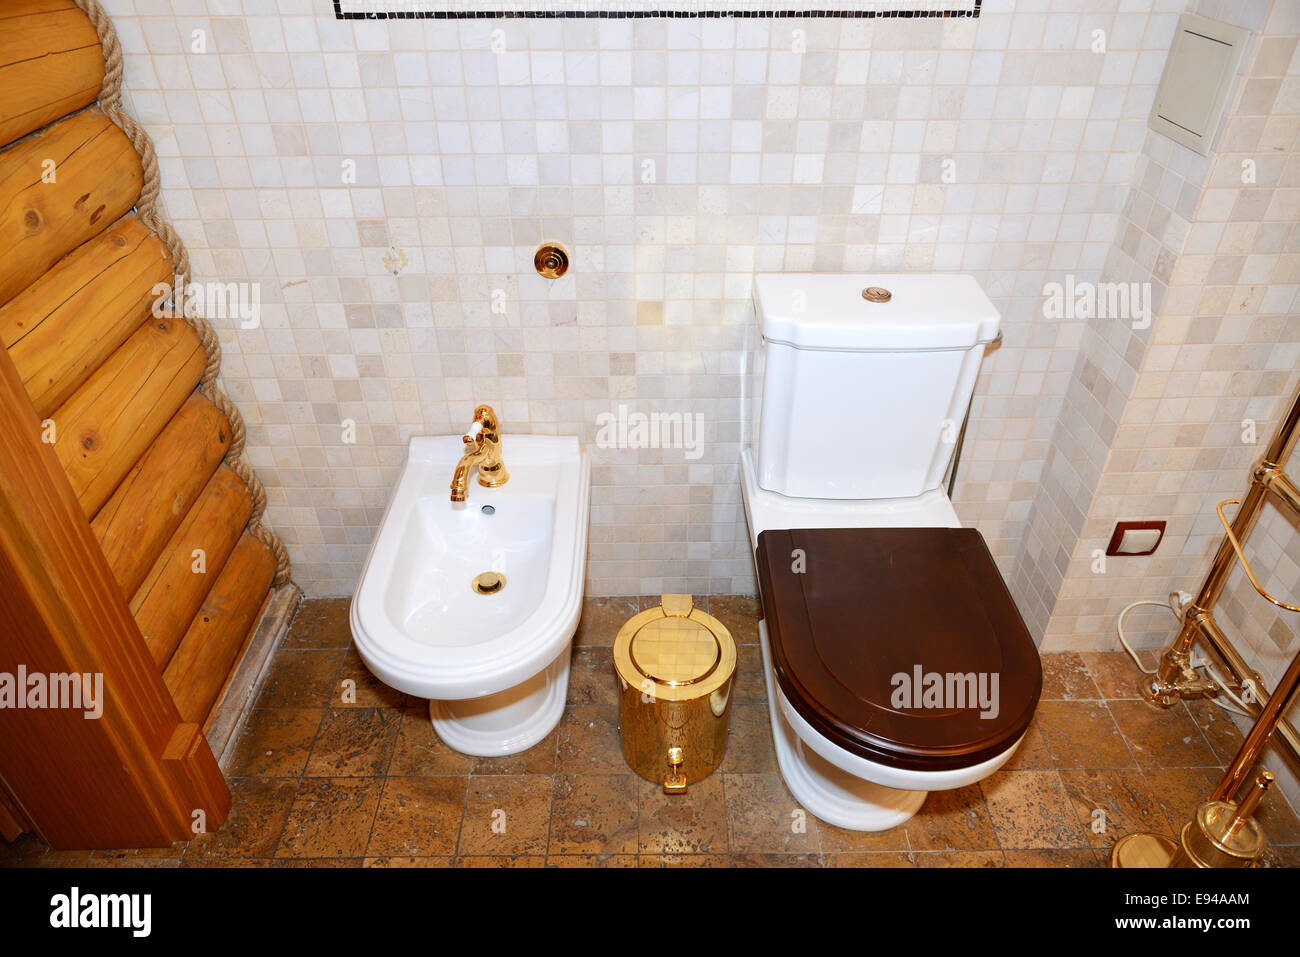 7,485 Gold Toilet Images, Stock Photos, 3D objects, & Vectors